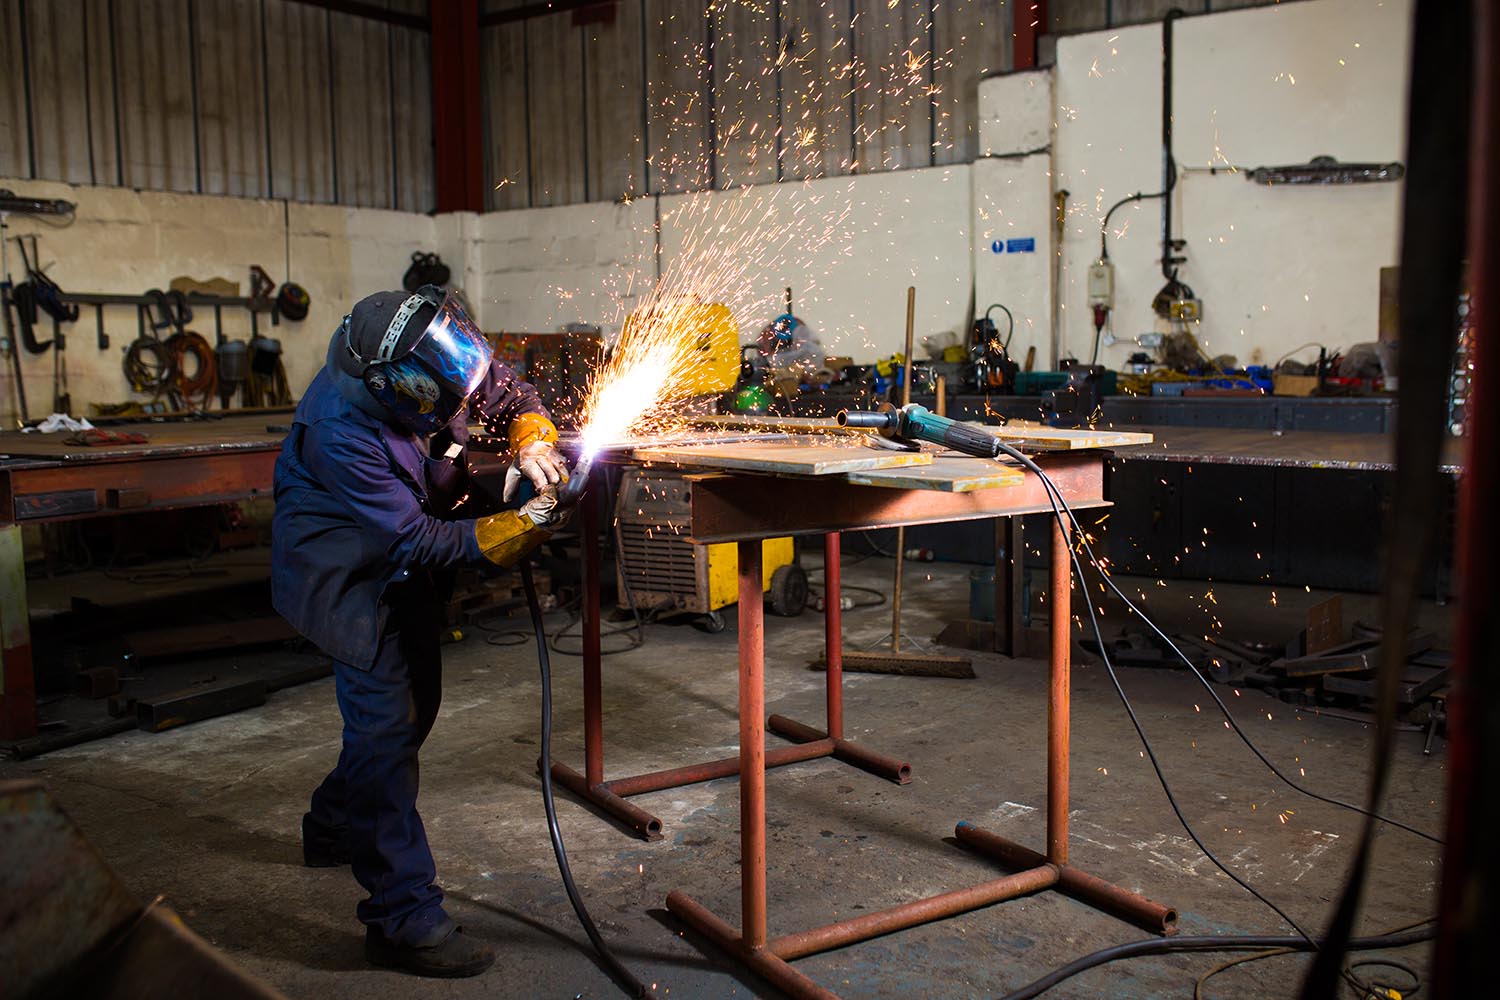 Engineer in welding mask grinding steel with sparks flying